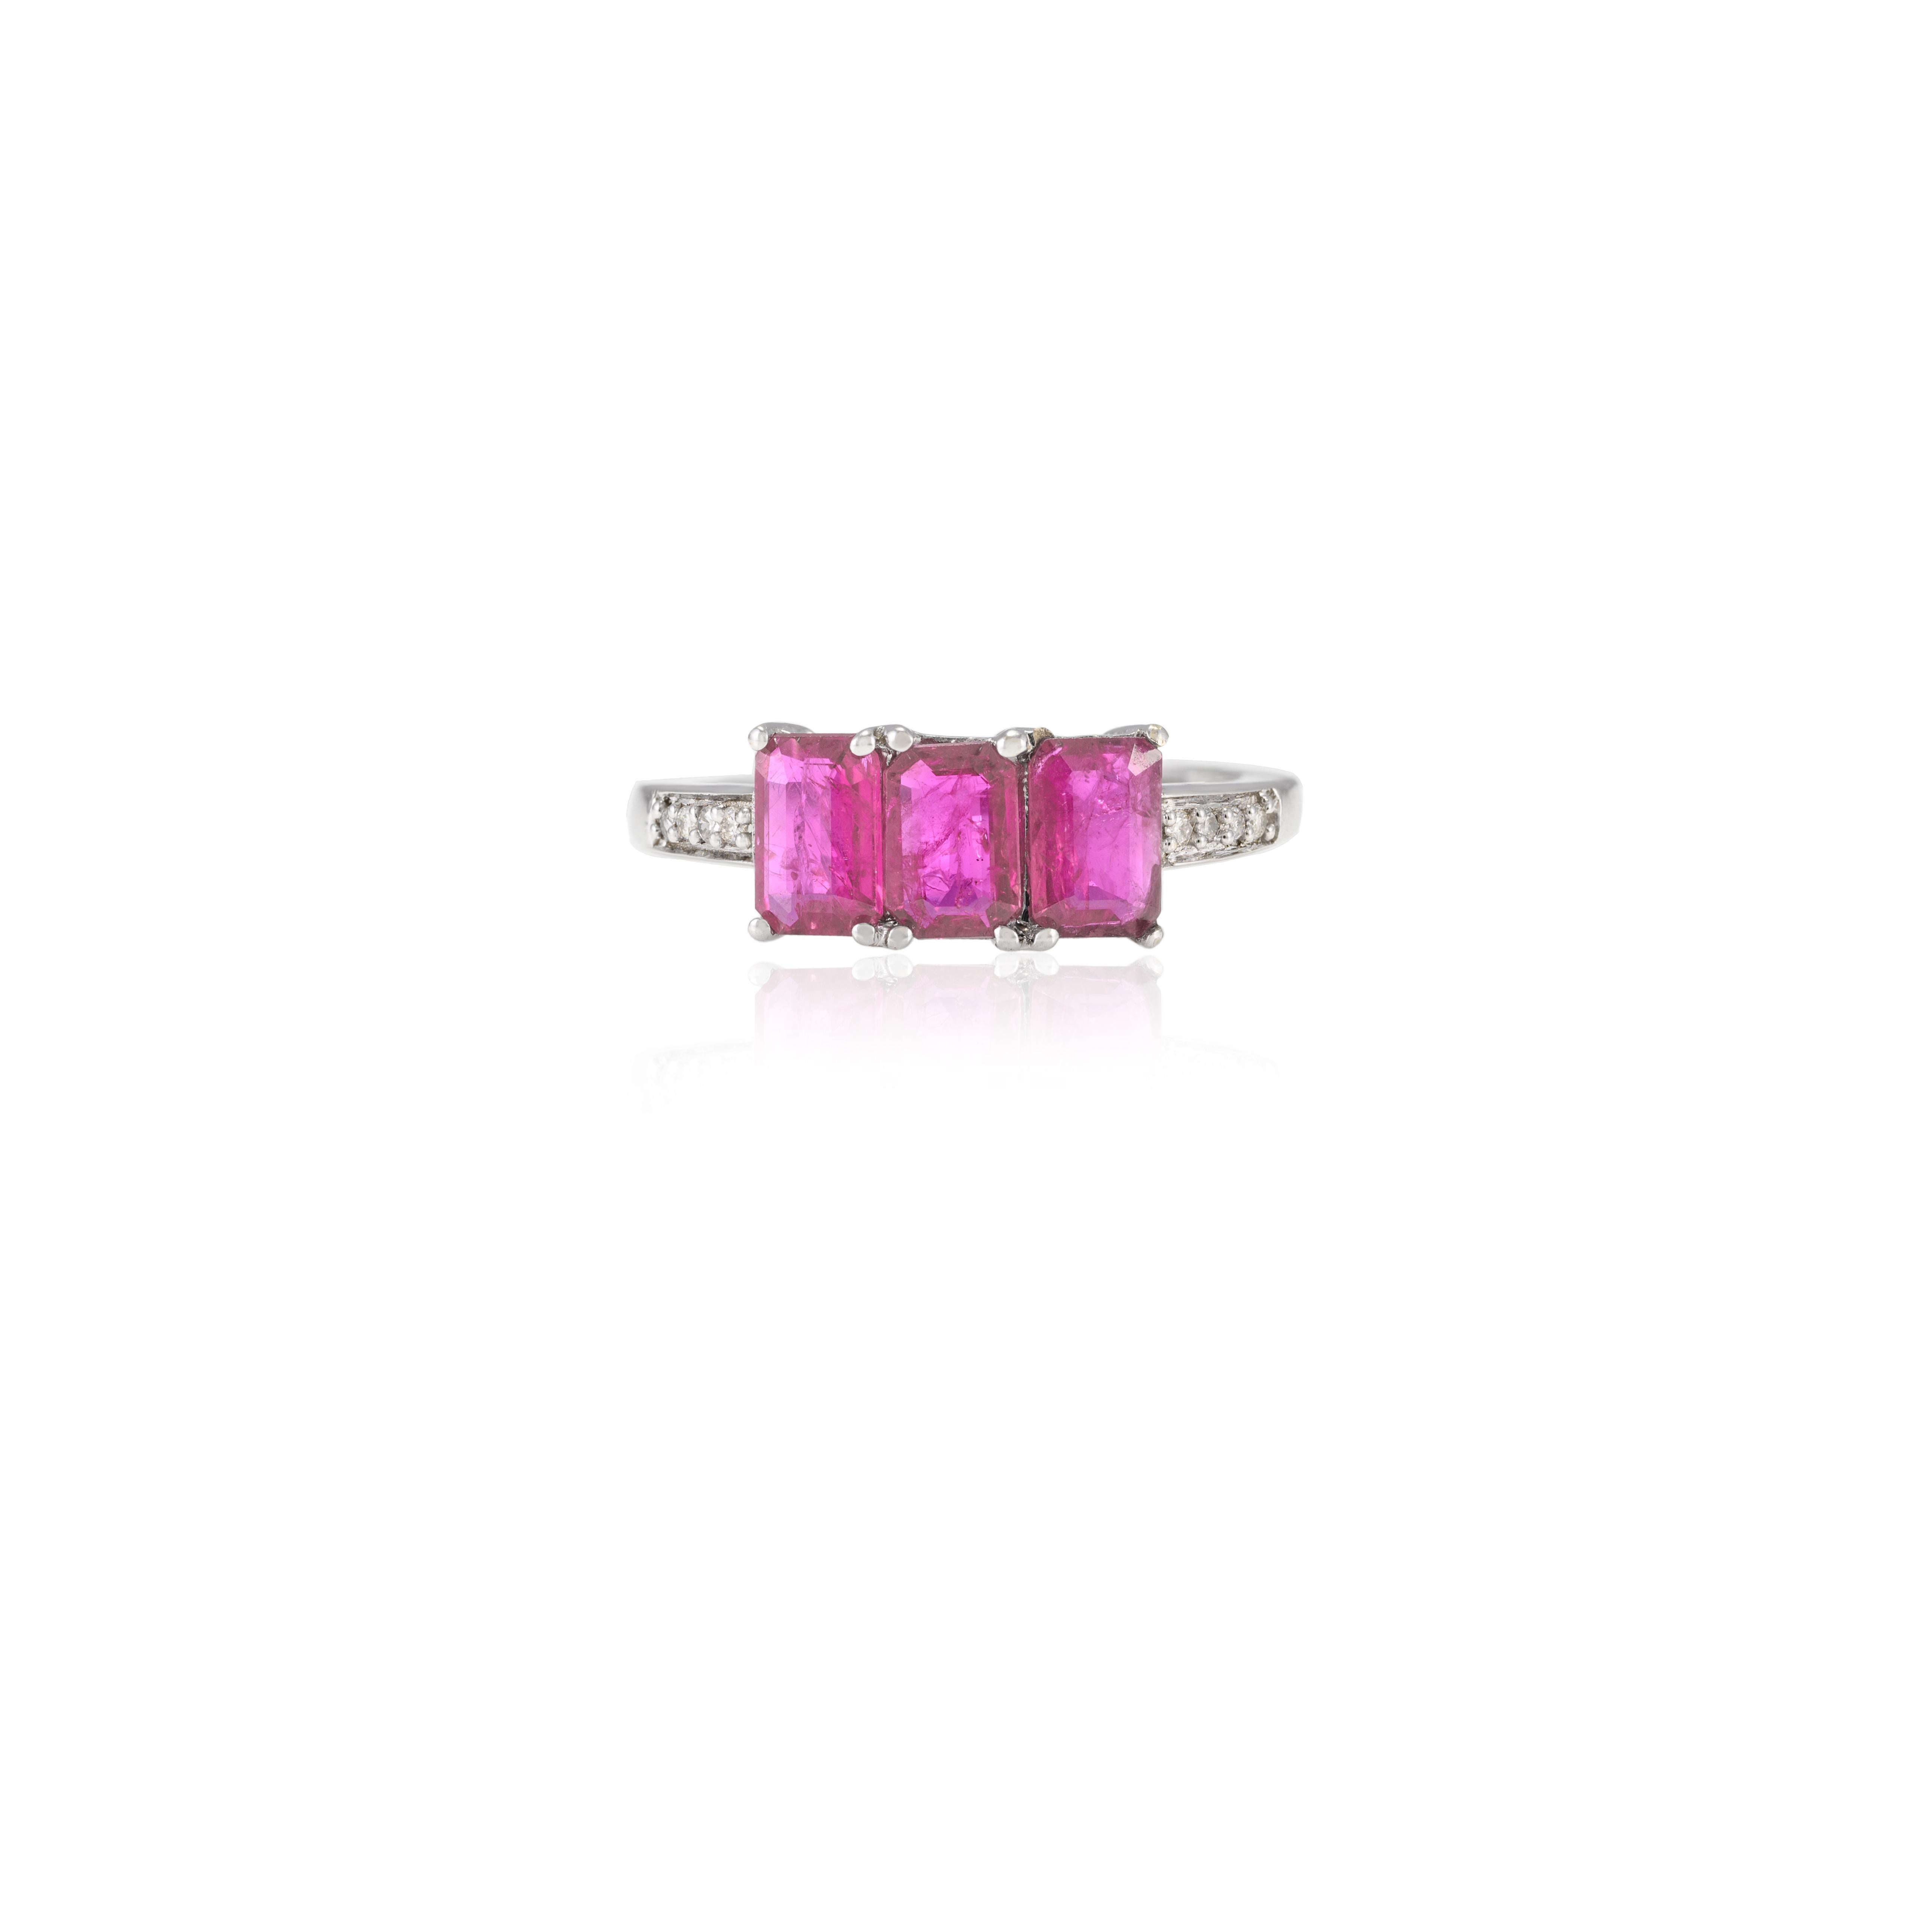 For Sale:  Three Stone Emerald Cut Ruby and Diamond Accent Ring in 14k White Gold 6